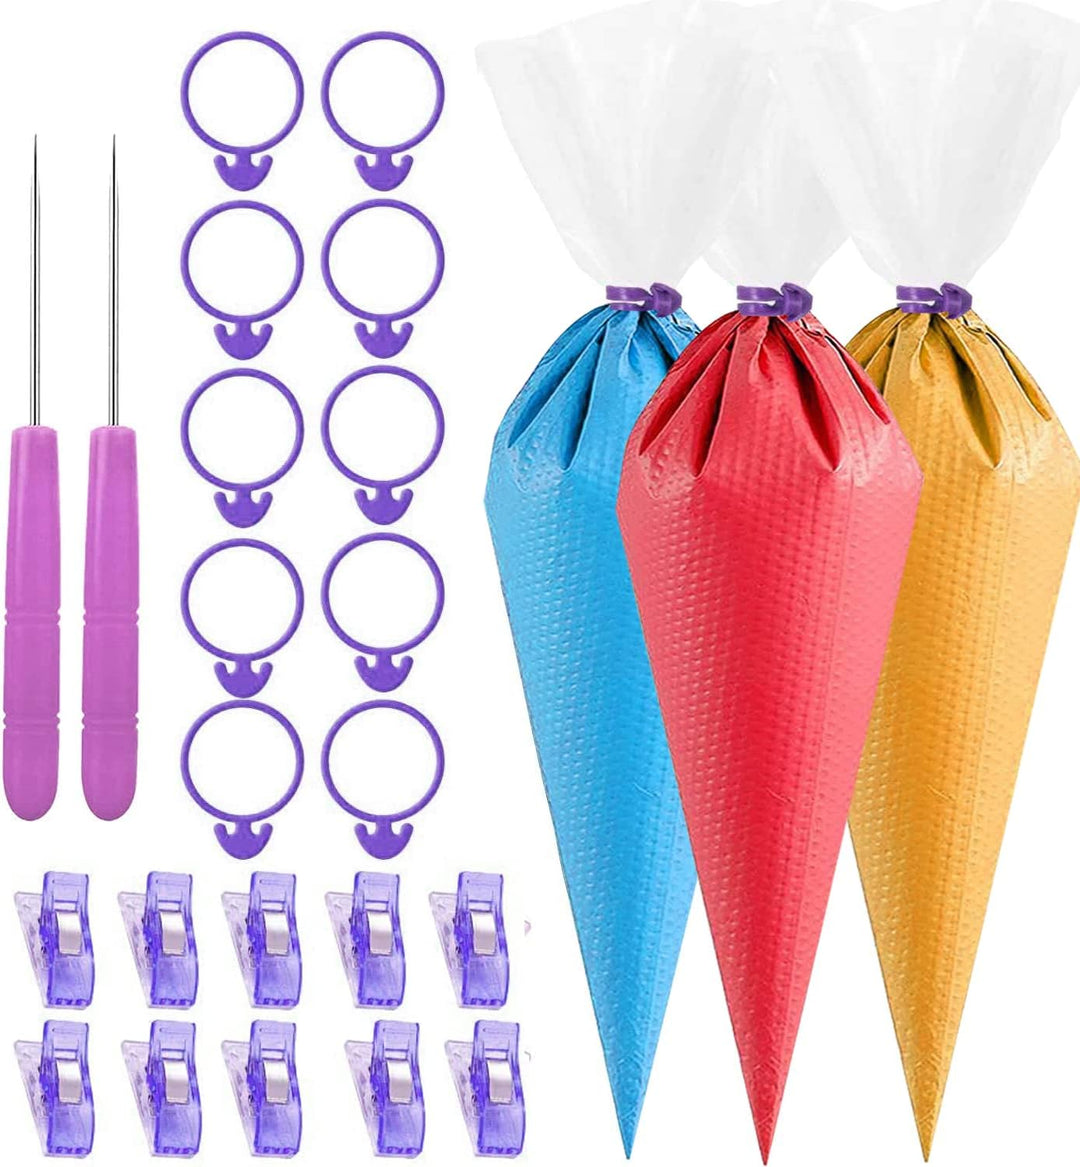 122 Pcs Cookie Decorating Tools, 100 Pcs Piping Pastry Bag, 10 Pieces Pastry Bag Ties, 10 Pcs Pastry Bag Clips and 2 Pieces Plastic Awls for Cake Cupcakes Frosting Icing Decoration (Purple)